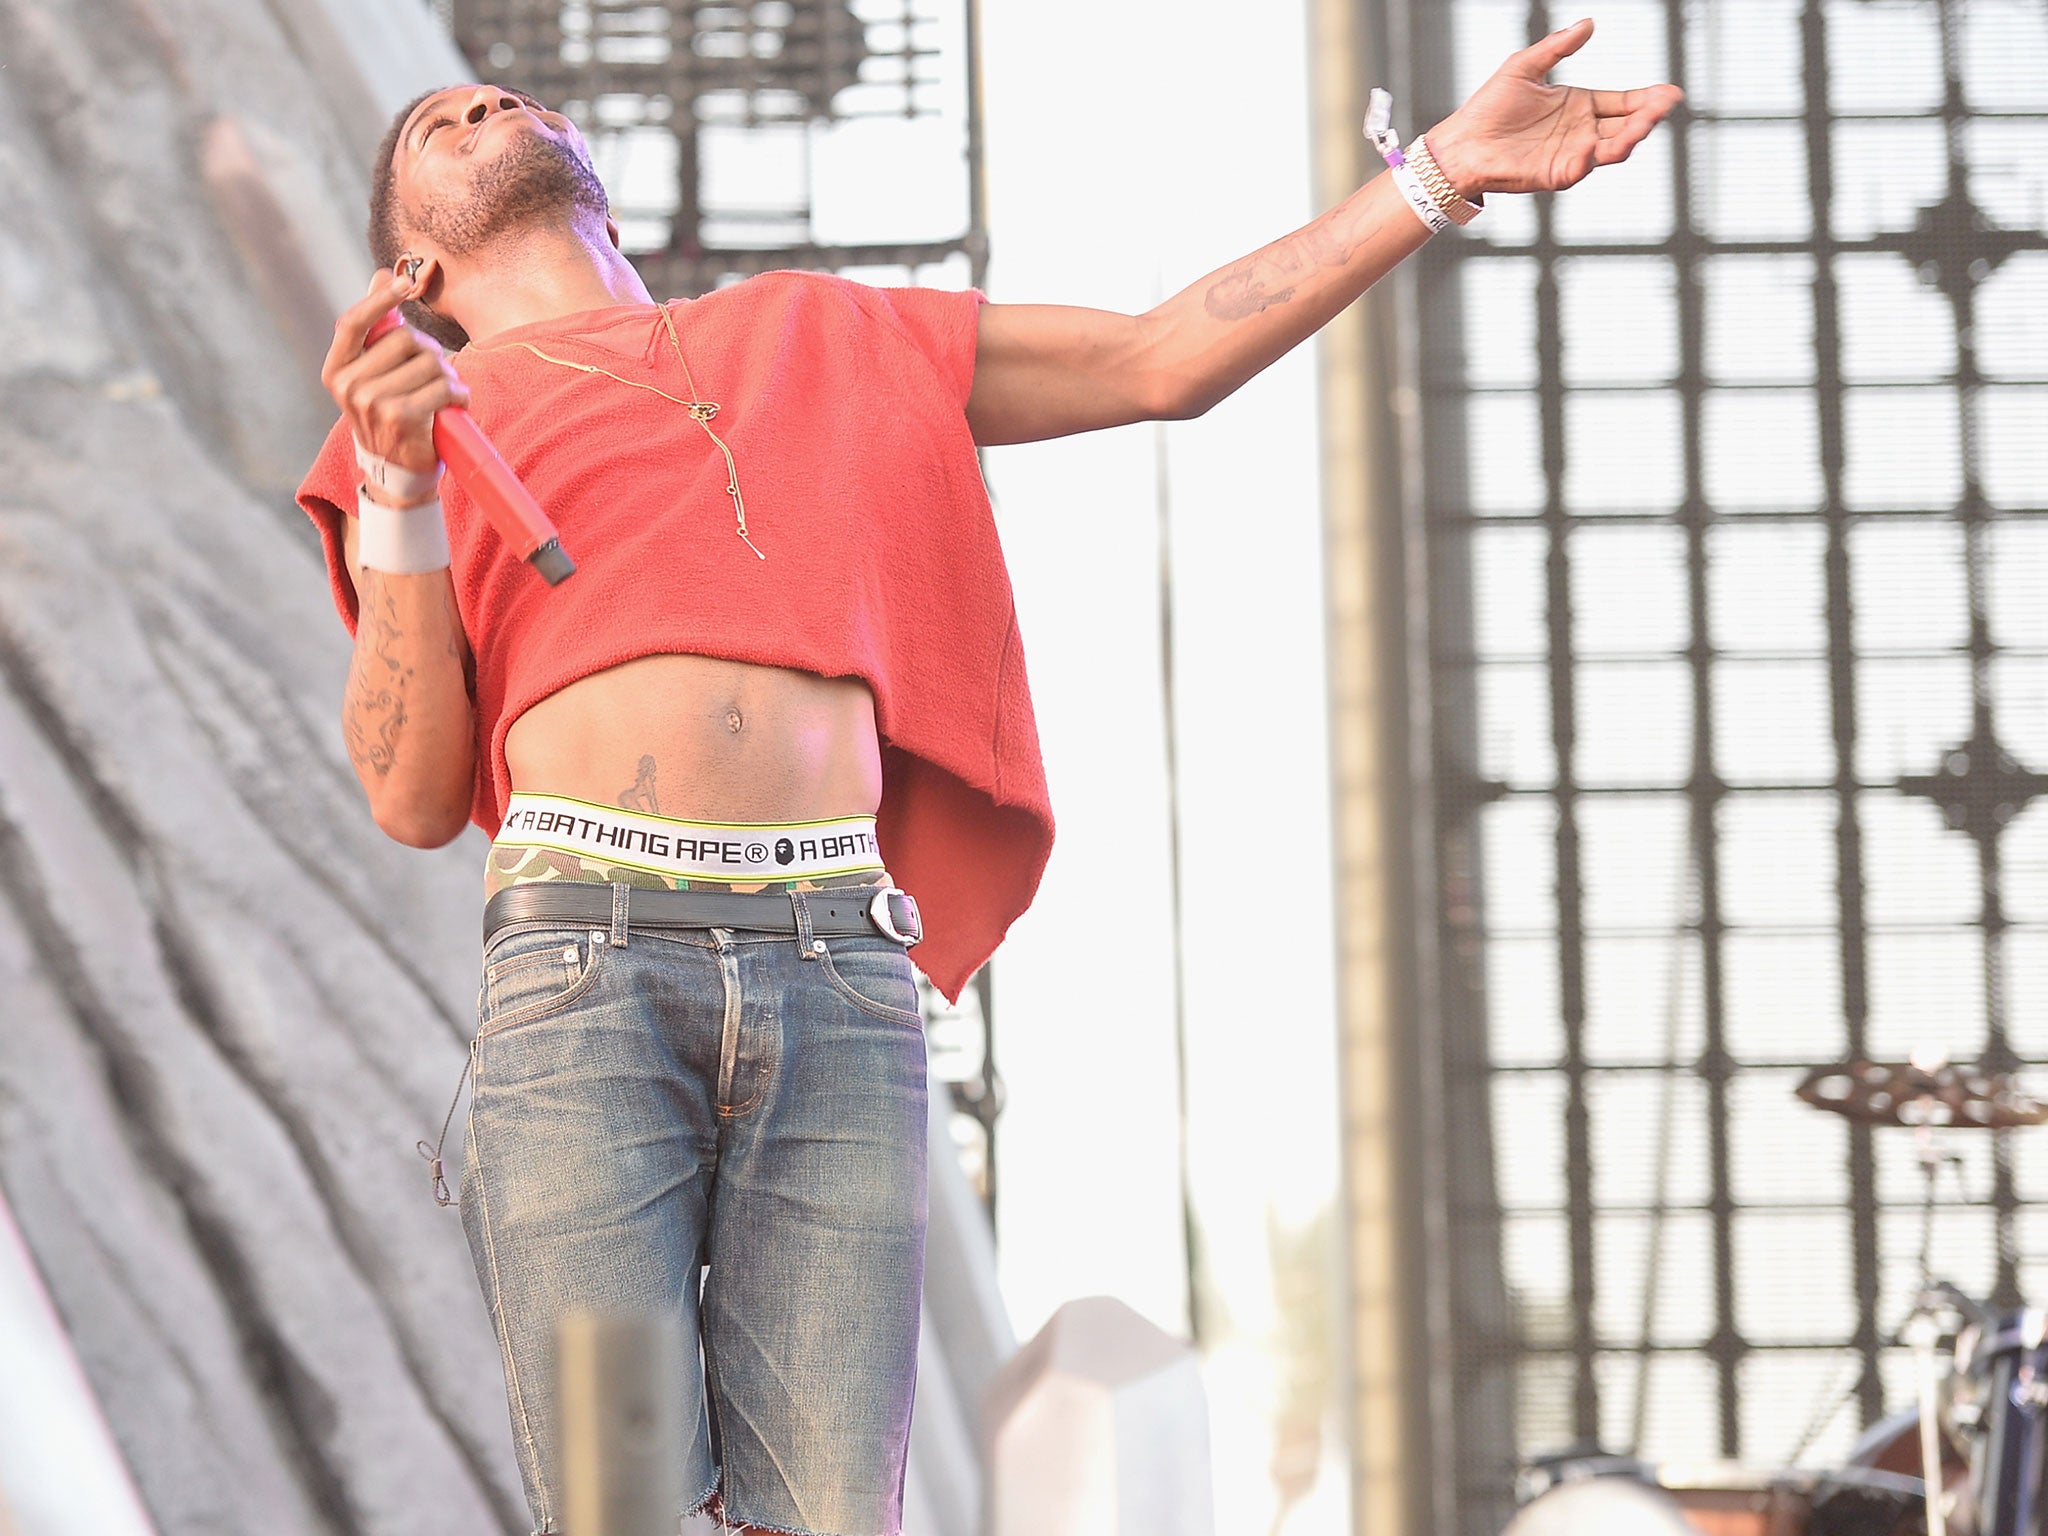 Kid Cudi brings back the crop top trend in men after his outfit during his Coachella performance